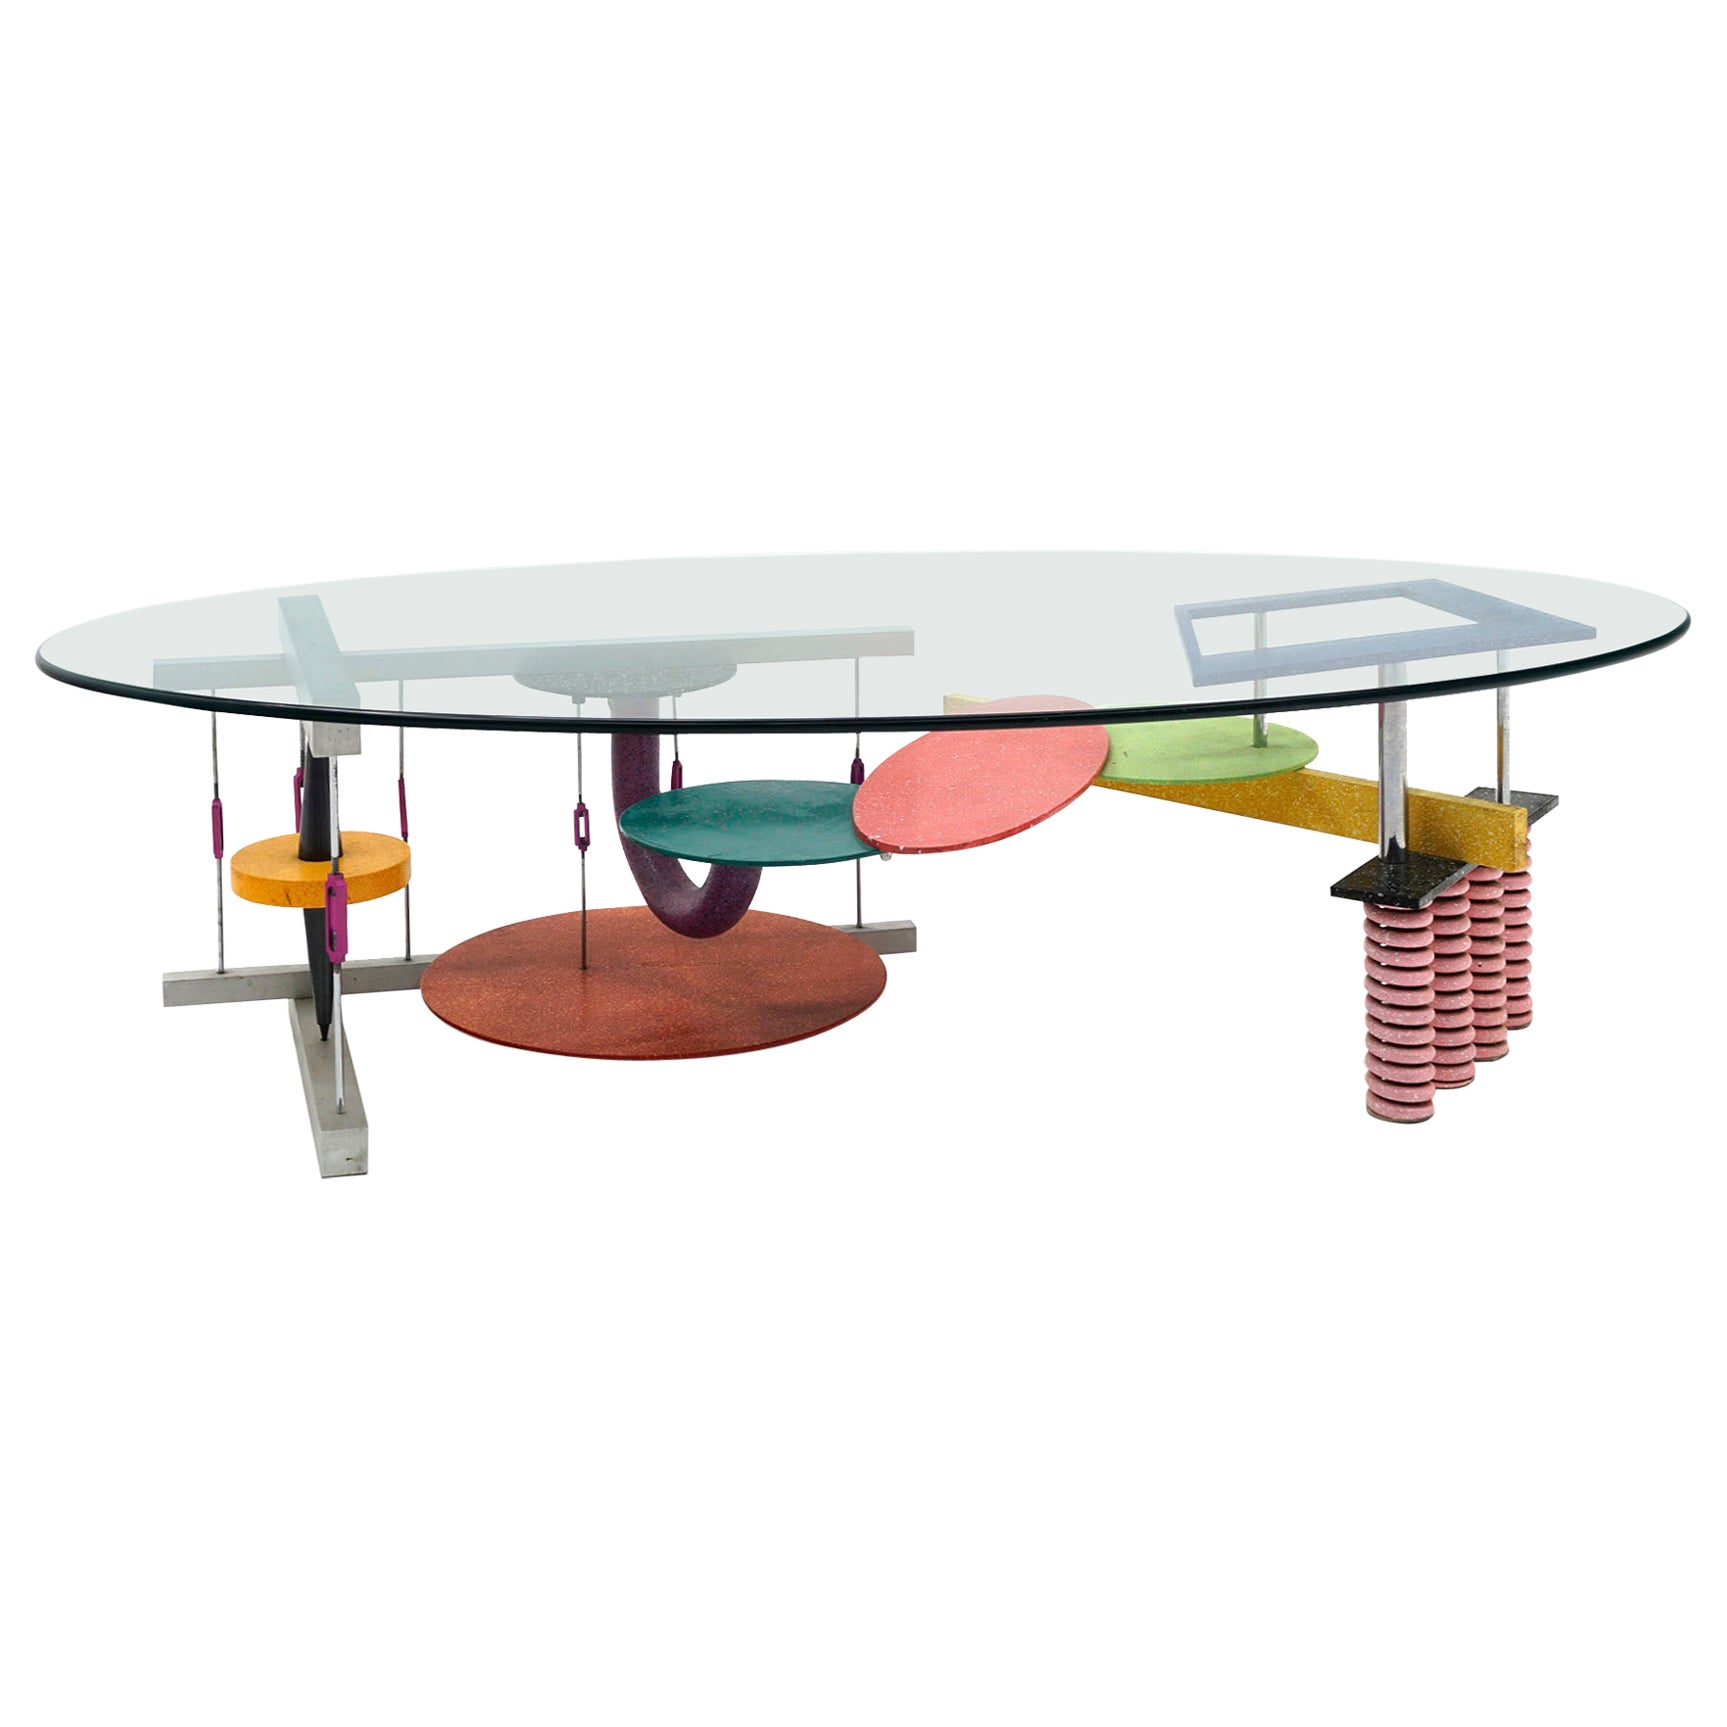 Peter Shire Coffee Table, Multi Color Steel & Aluminum with Oval Glass Top